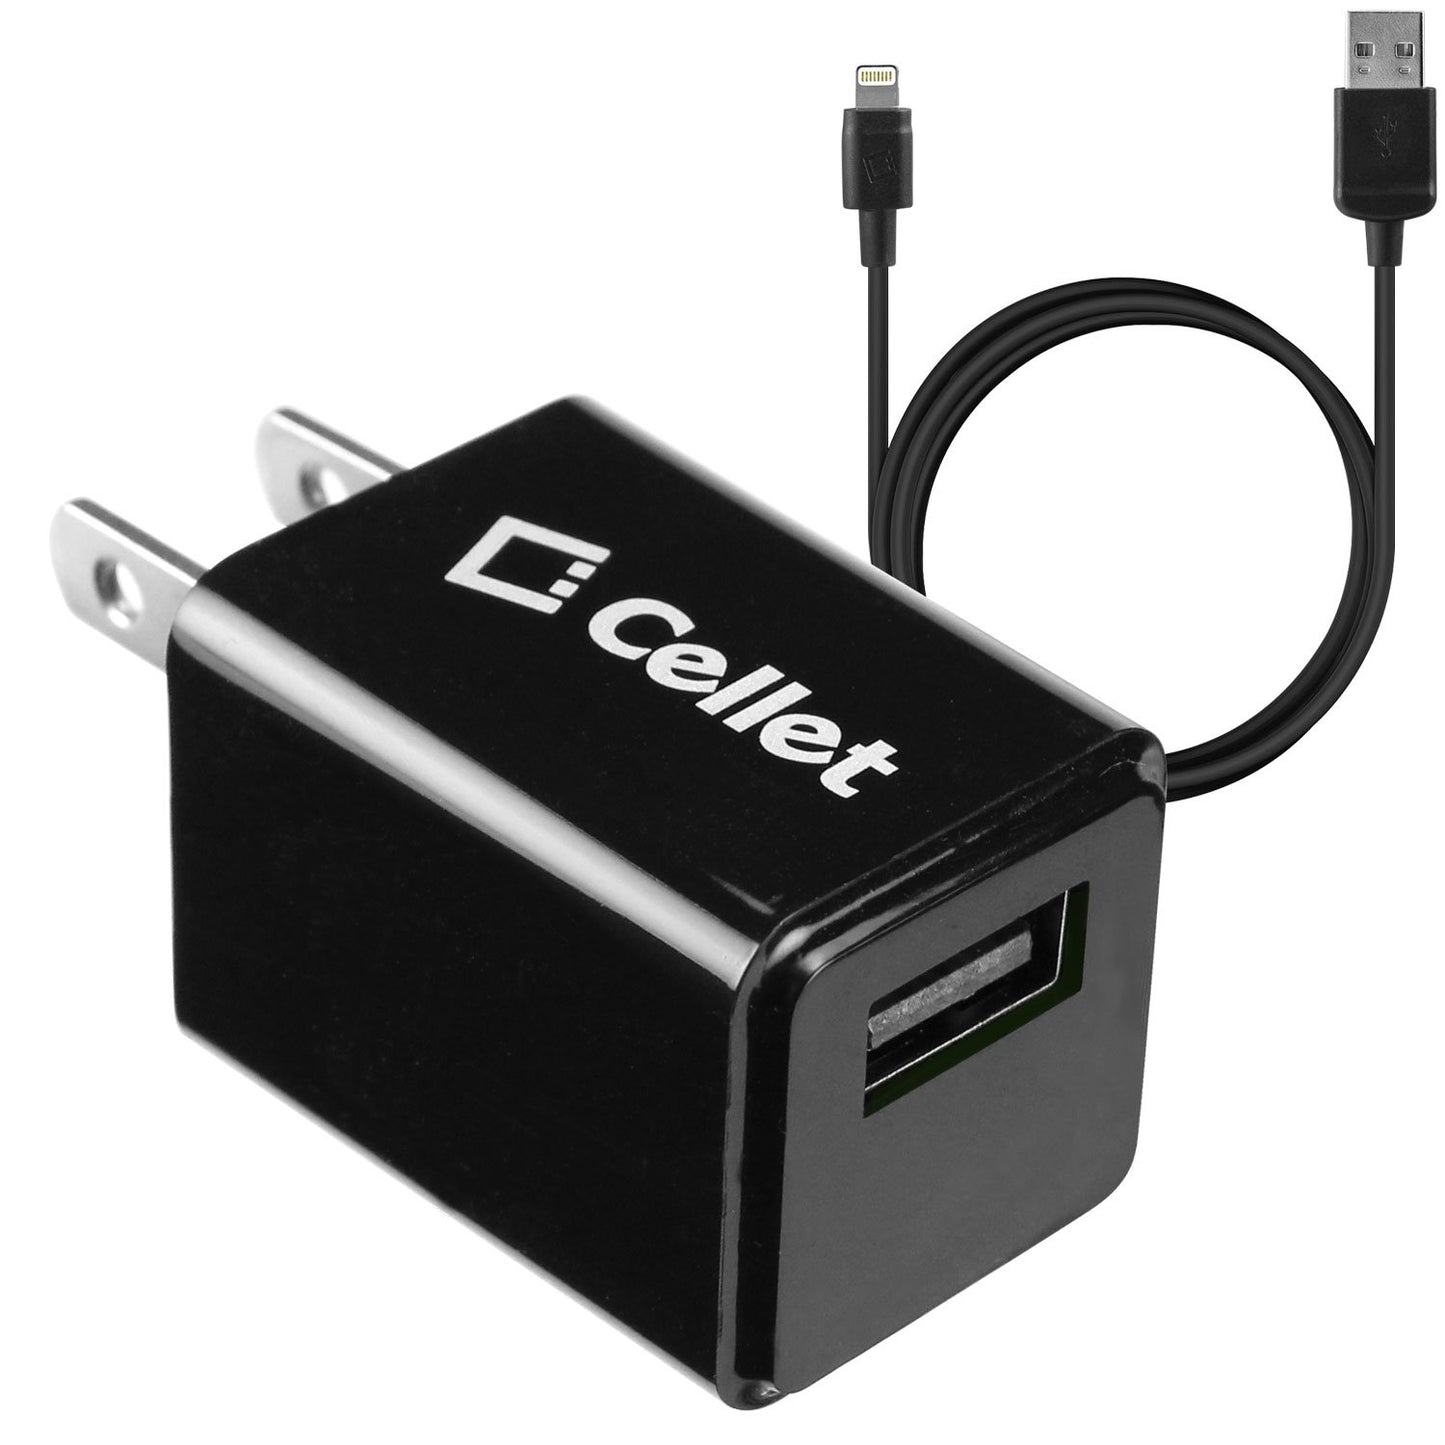 TCAPP8F12BK - Cellet 5 Watt (1 Amp) with Folding Blades Single Port Home Charger (Lightning Cable Included, Apple MFI Certified) - Black